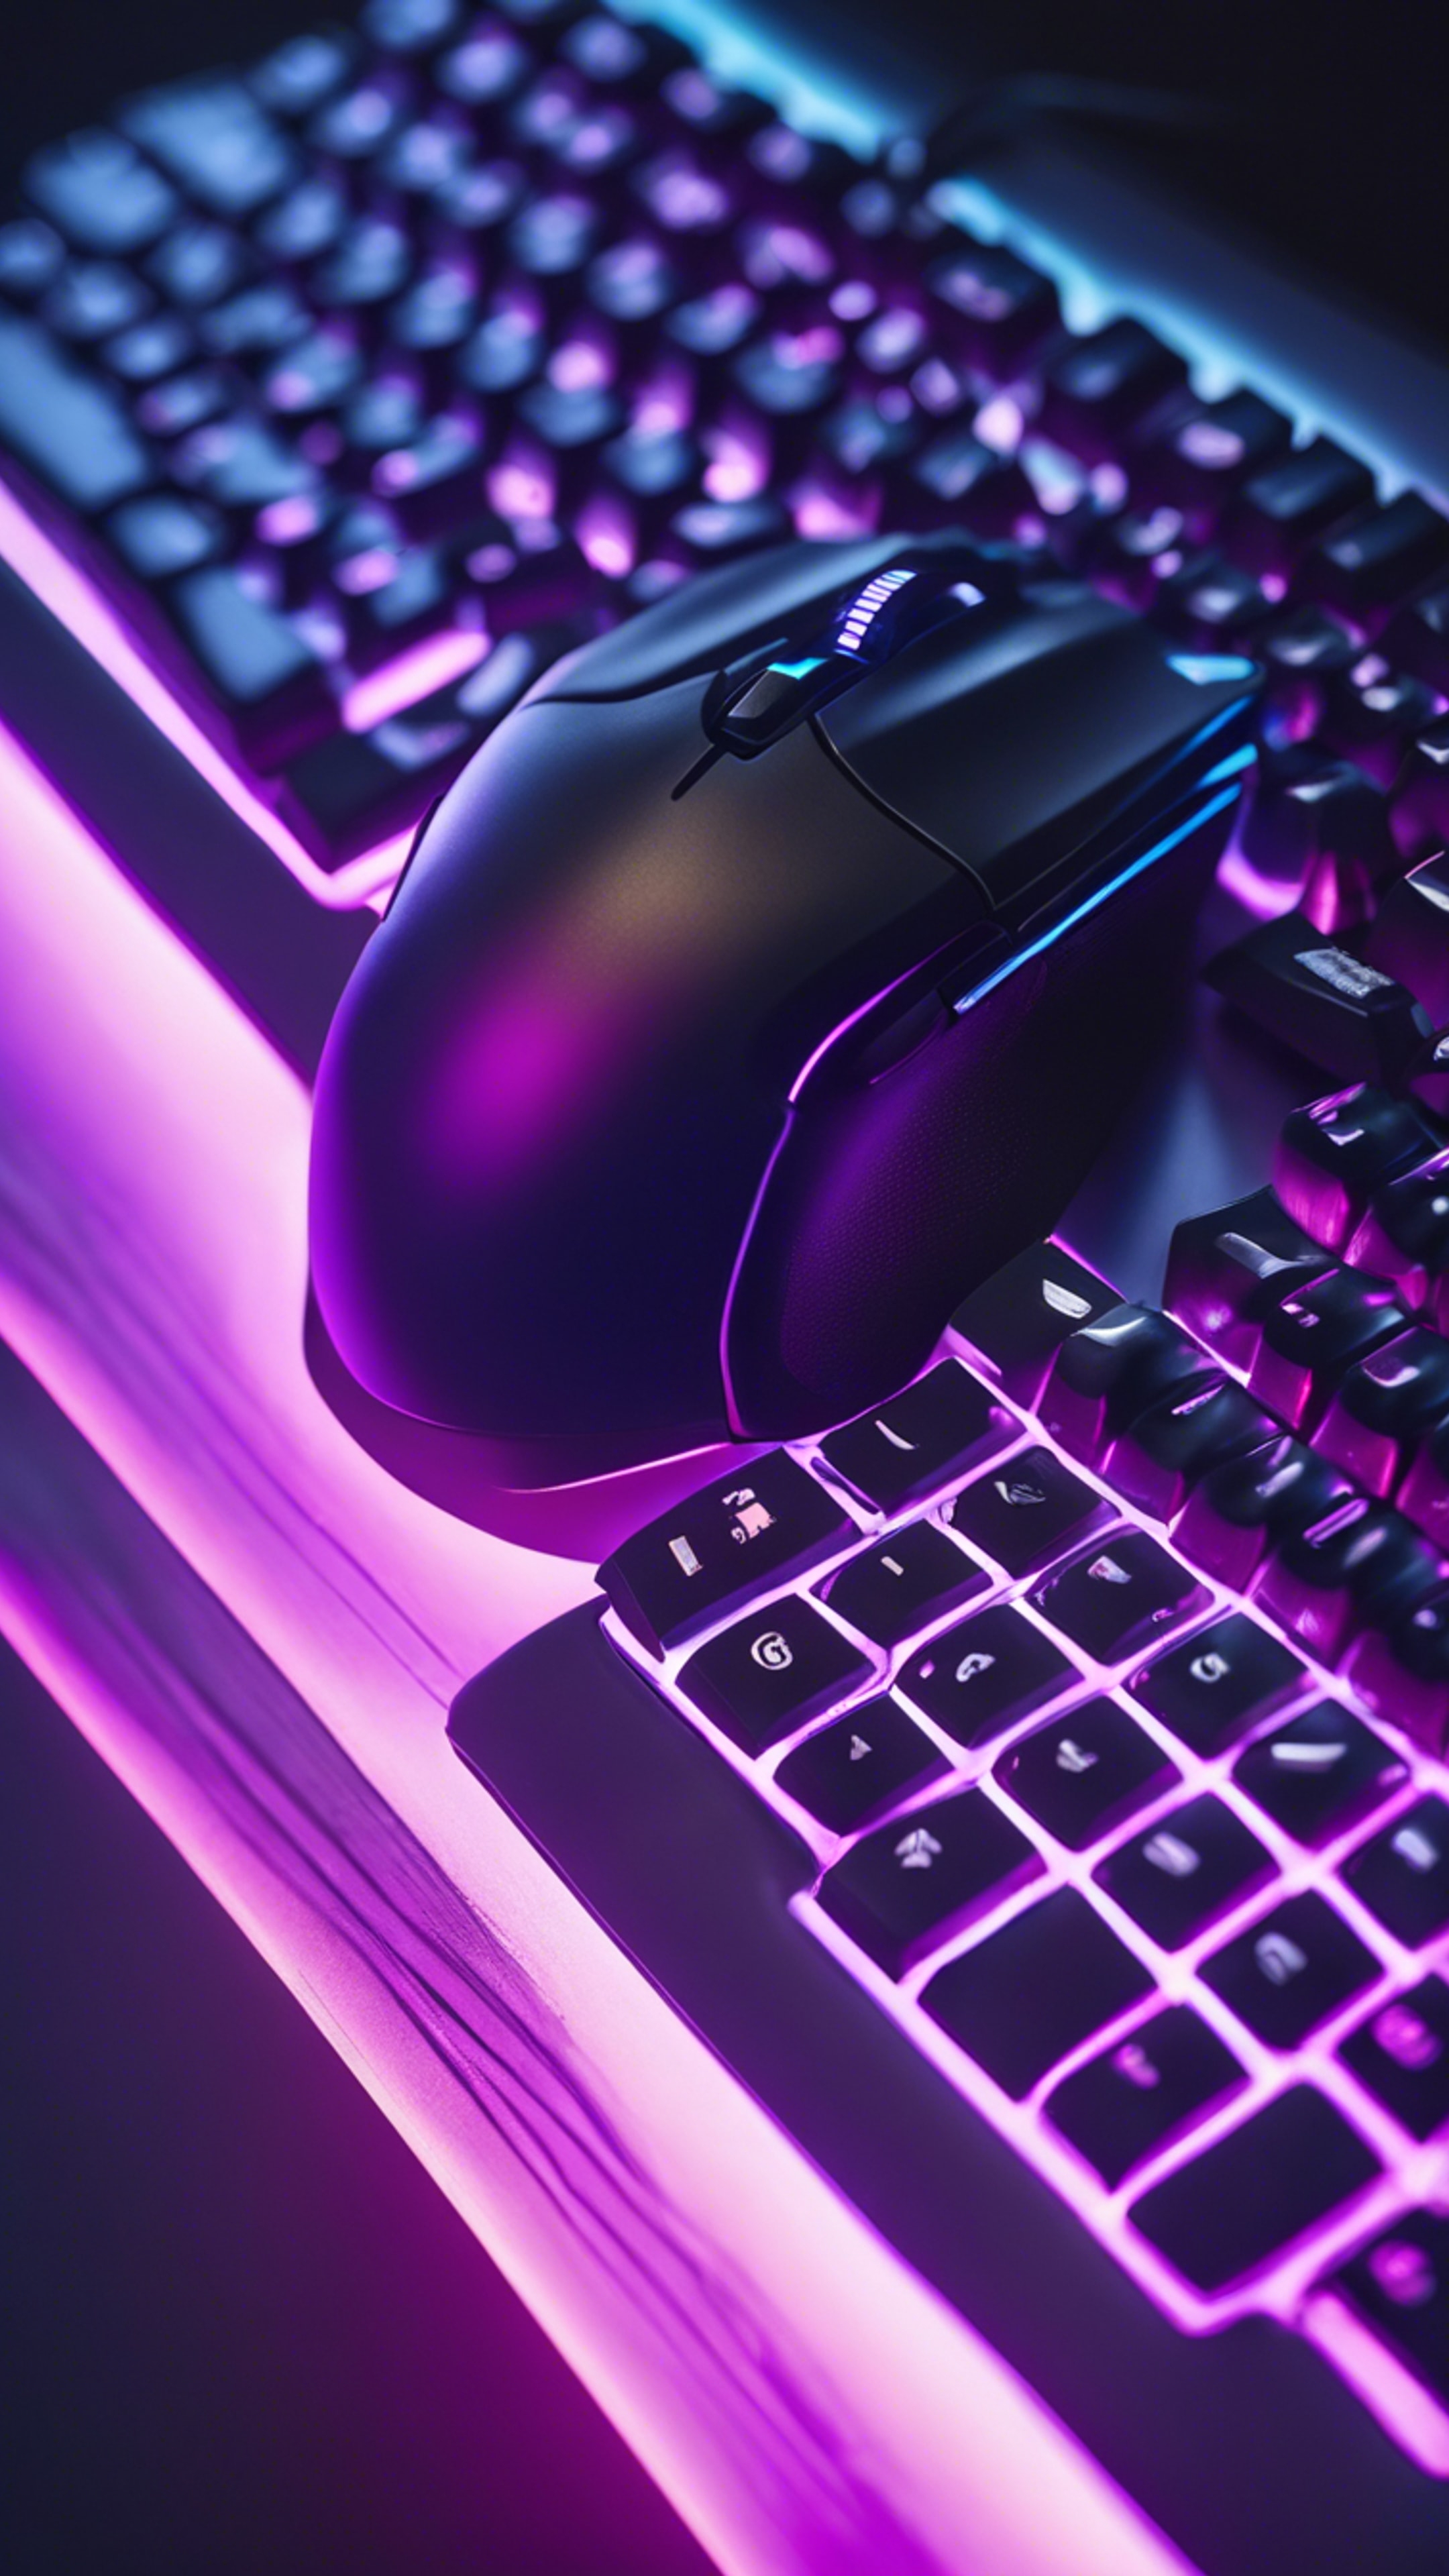 A top down view of a gaming keyboard and mouse bathed in a soothing gradient of blue to purple backlighting. Ფონი[d1c9d3144afe4da3b536]